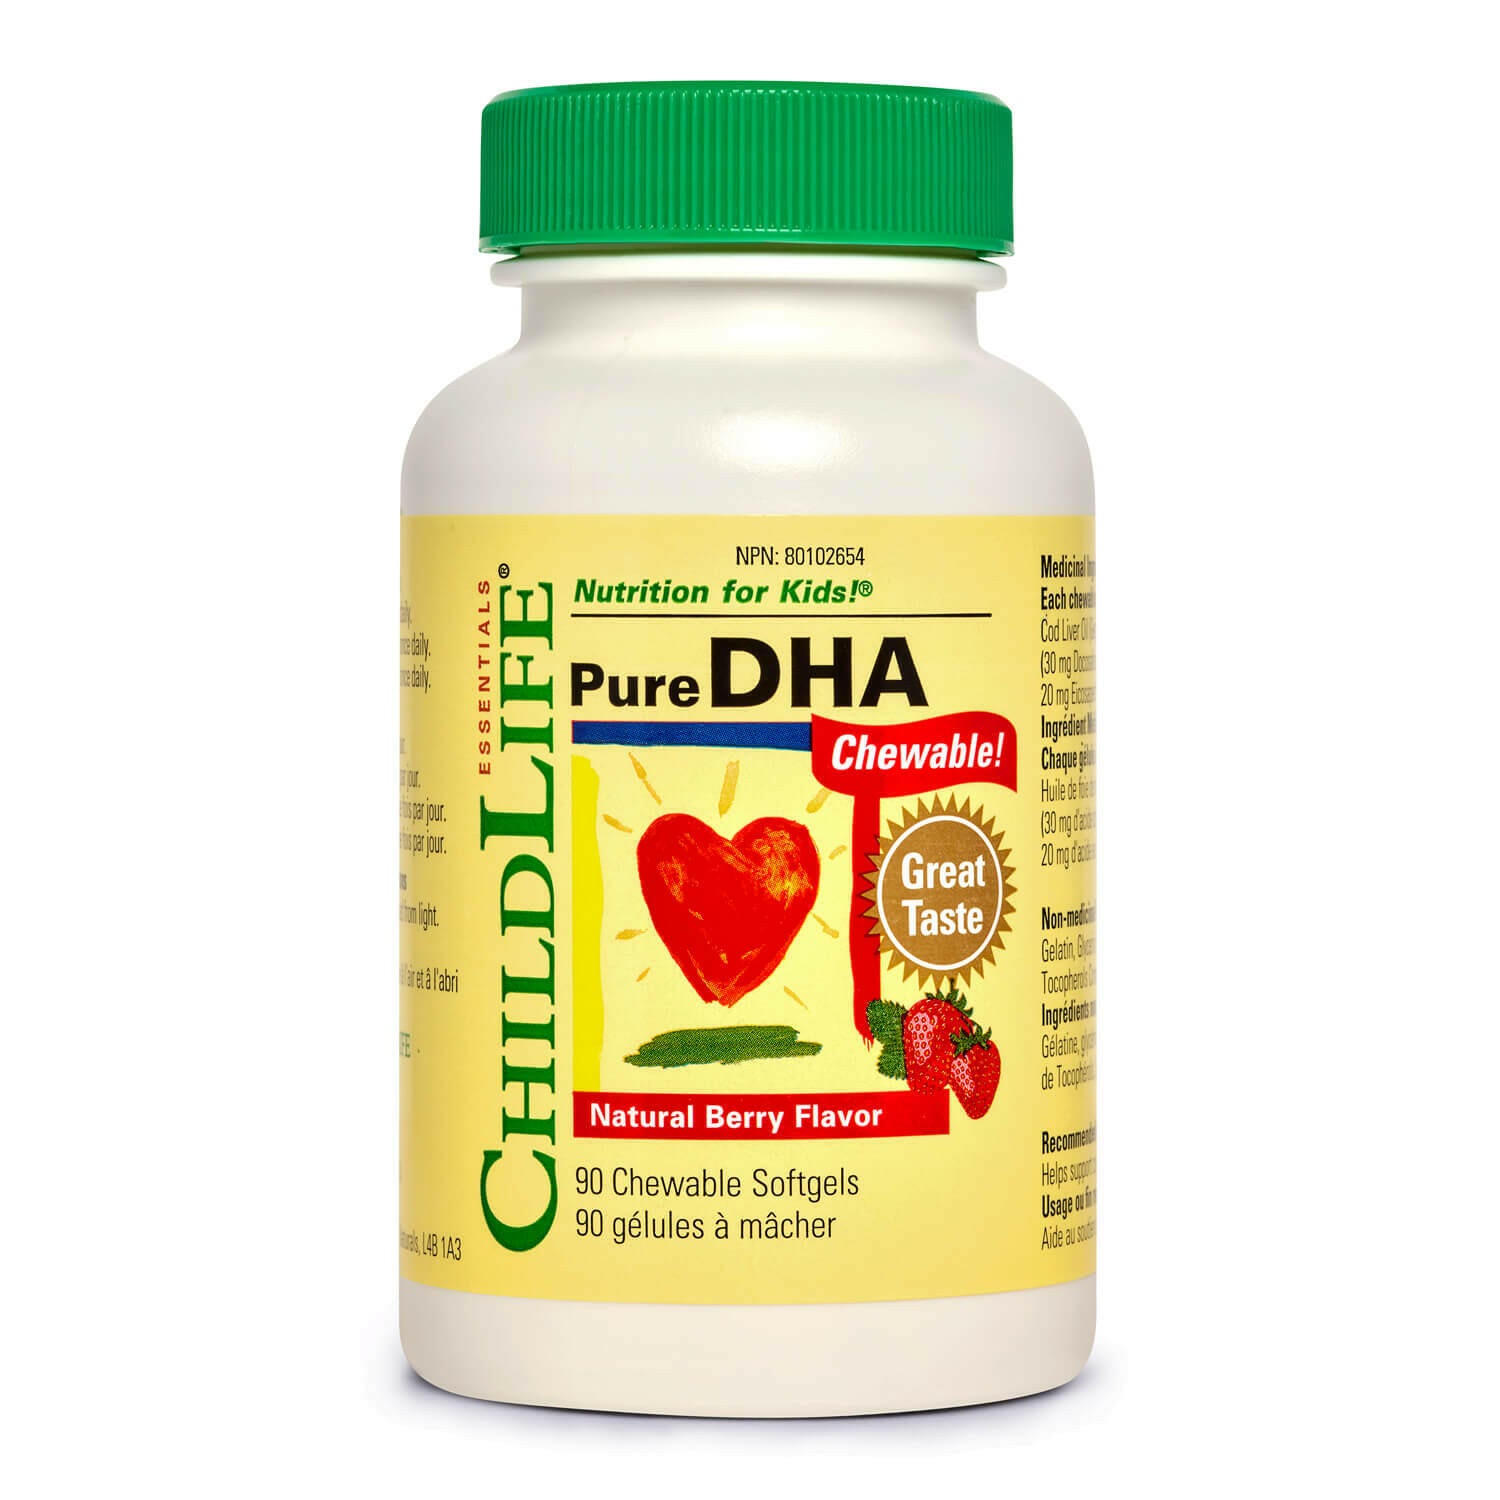 ChildLife Pure DHA (90 chewables softgels)